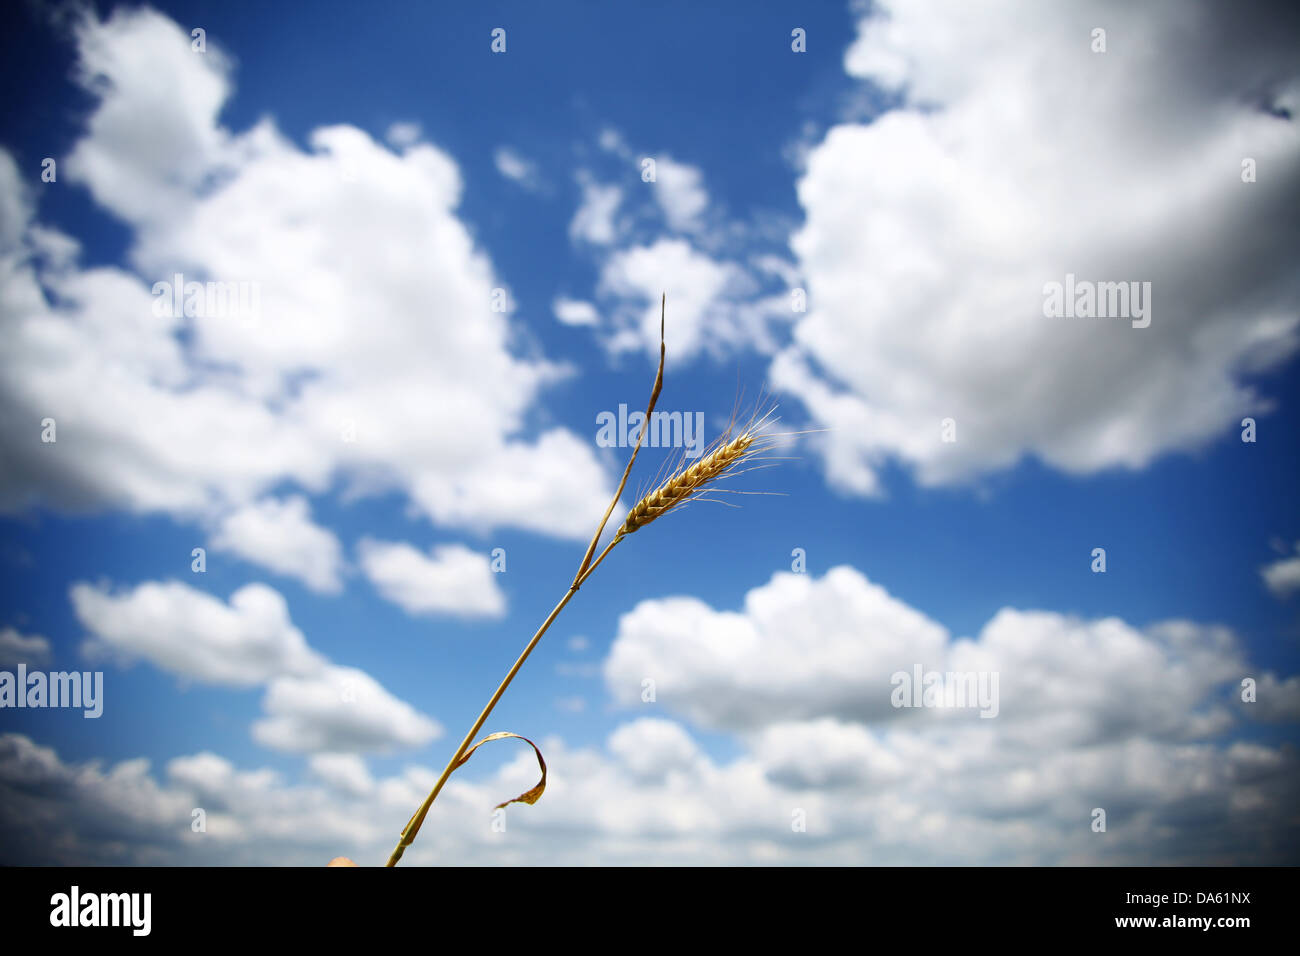 A straw of wheat against a blue cloudy sky Stock Photo